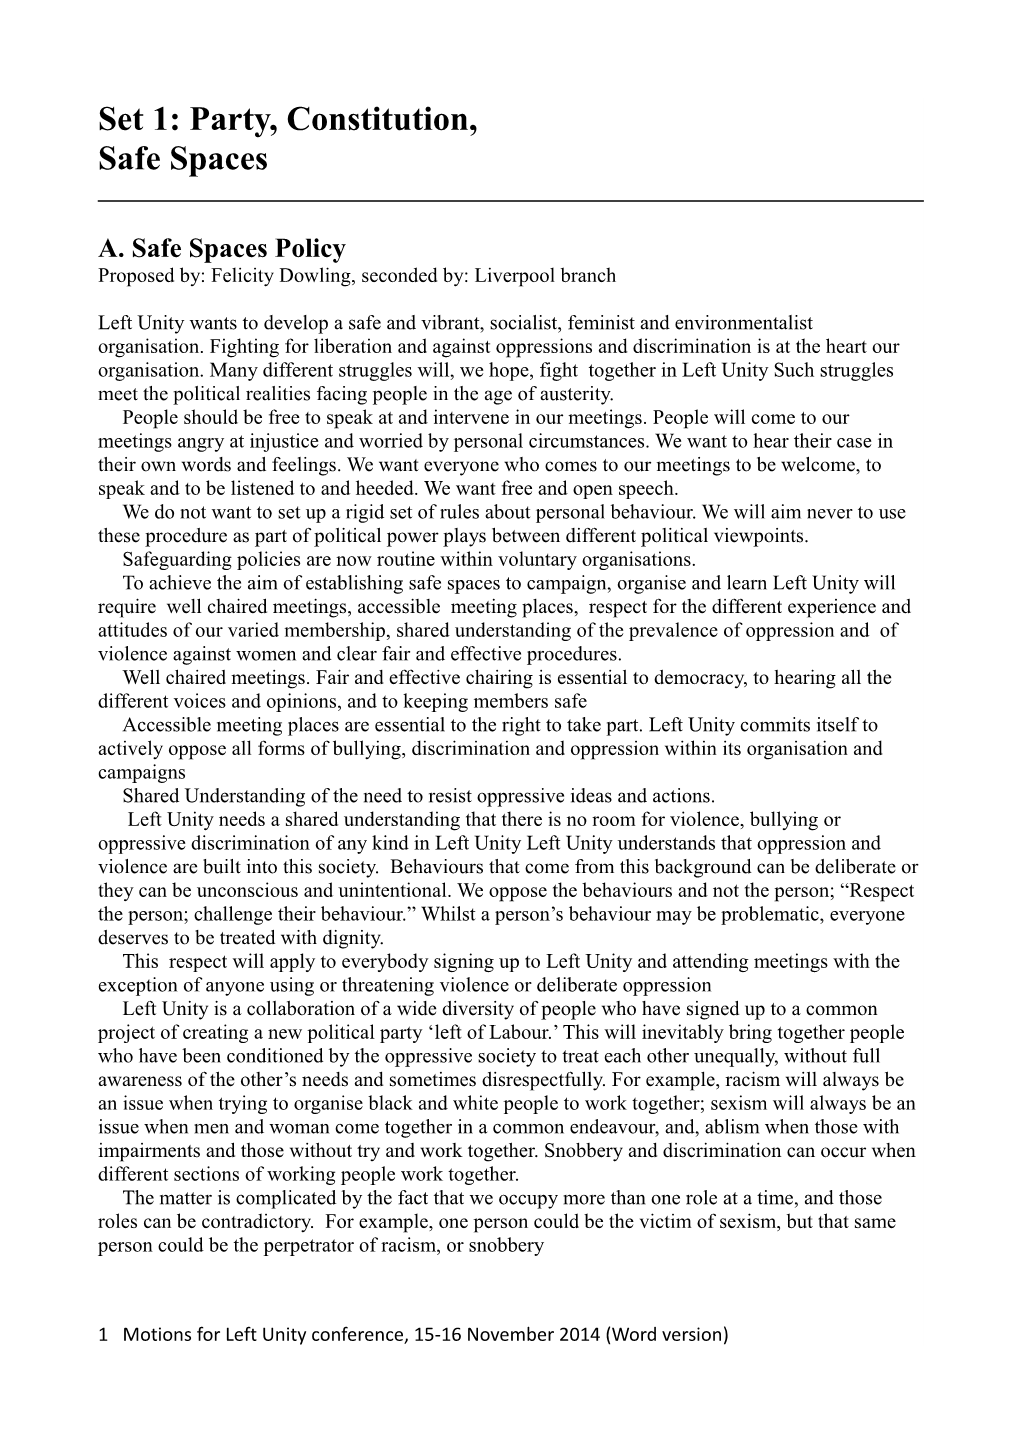 A. Safe Spaces Policy